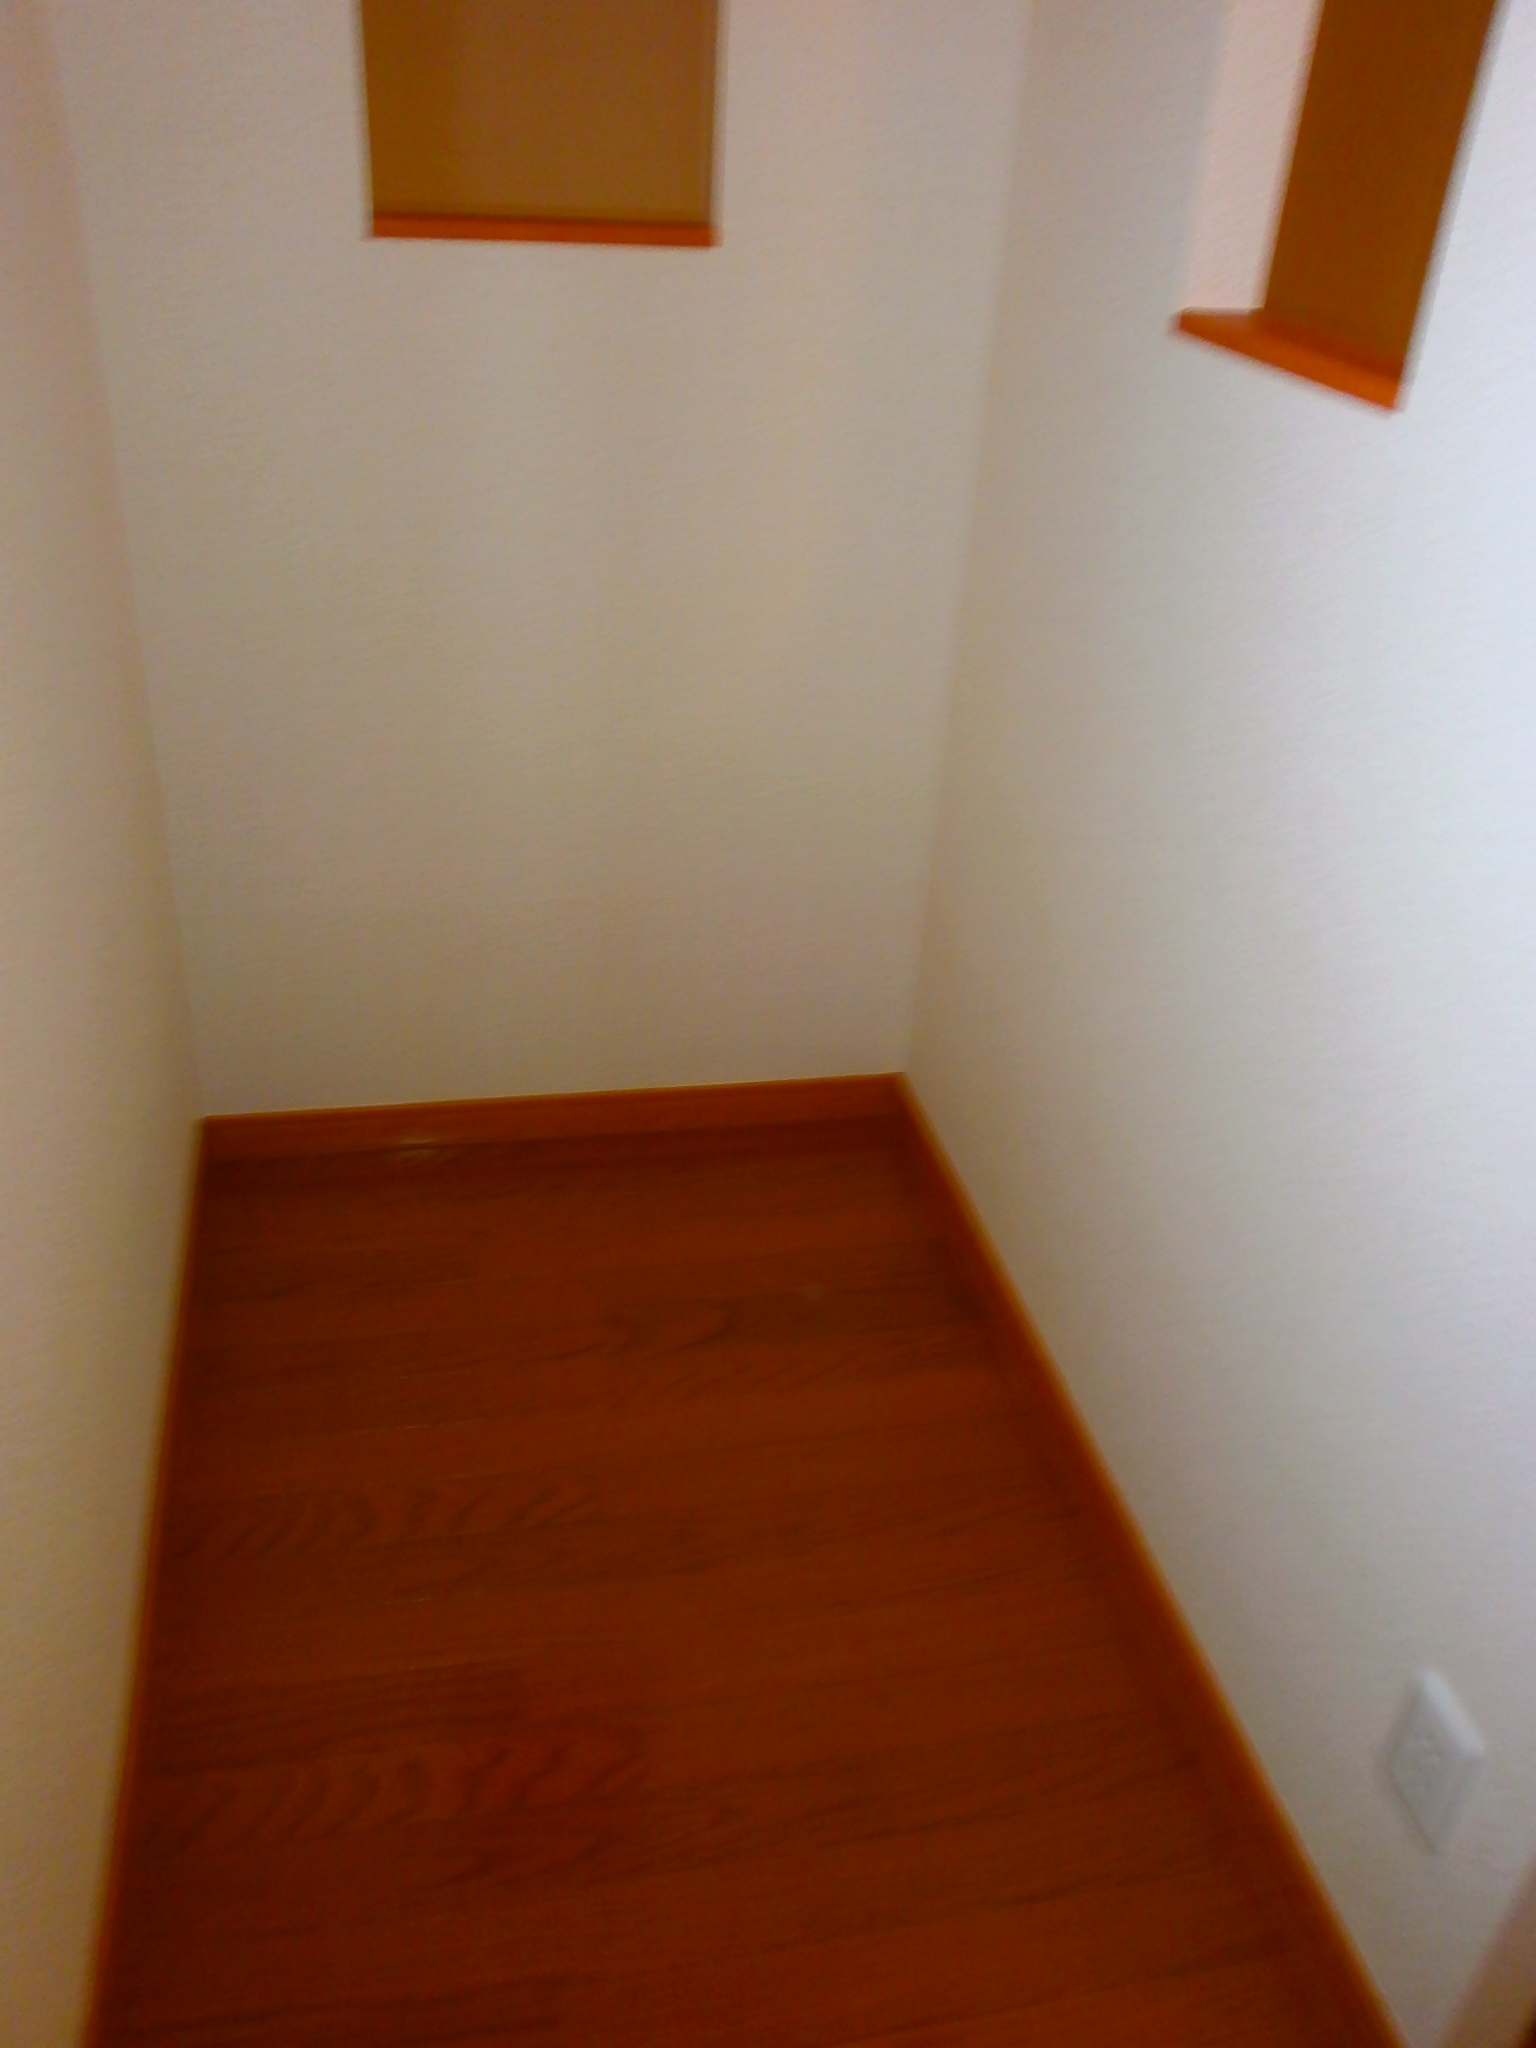 Other room space. It is separate from a small room with the main room